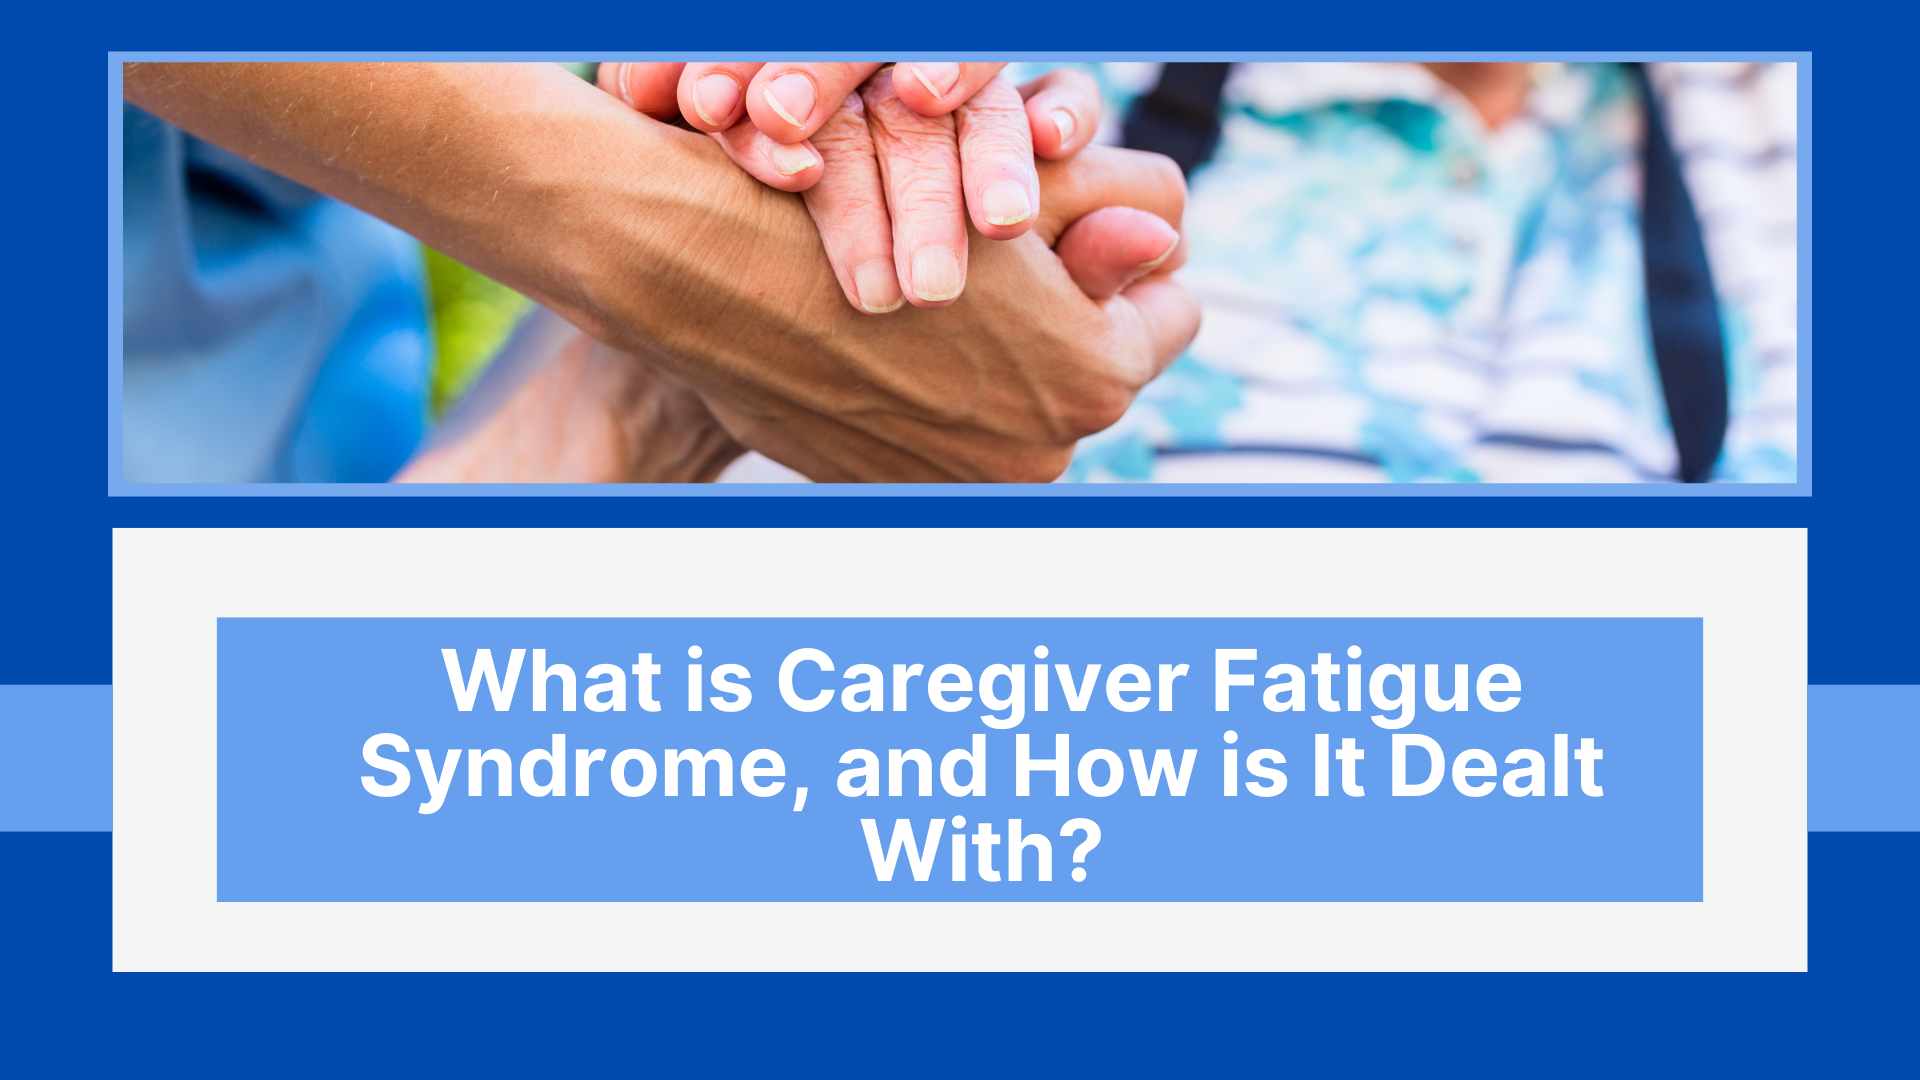 What is Caregiver Fatigue Syndrome, and How is It Dealt With?